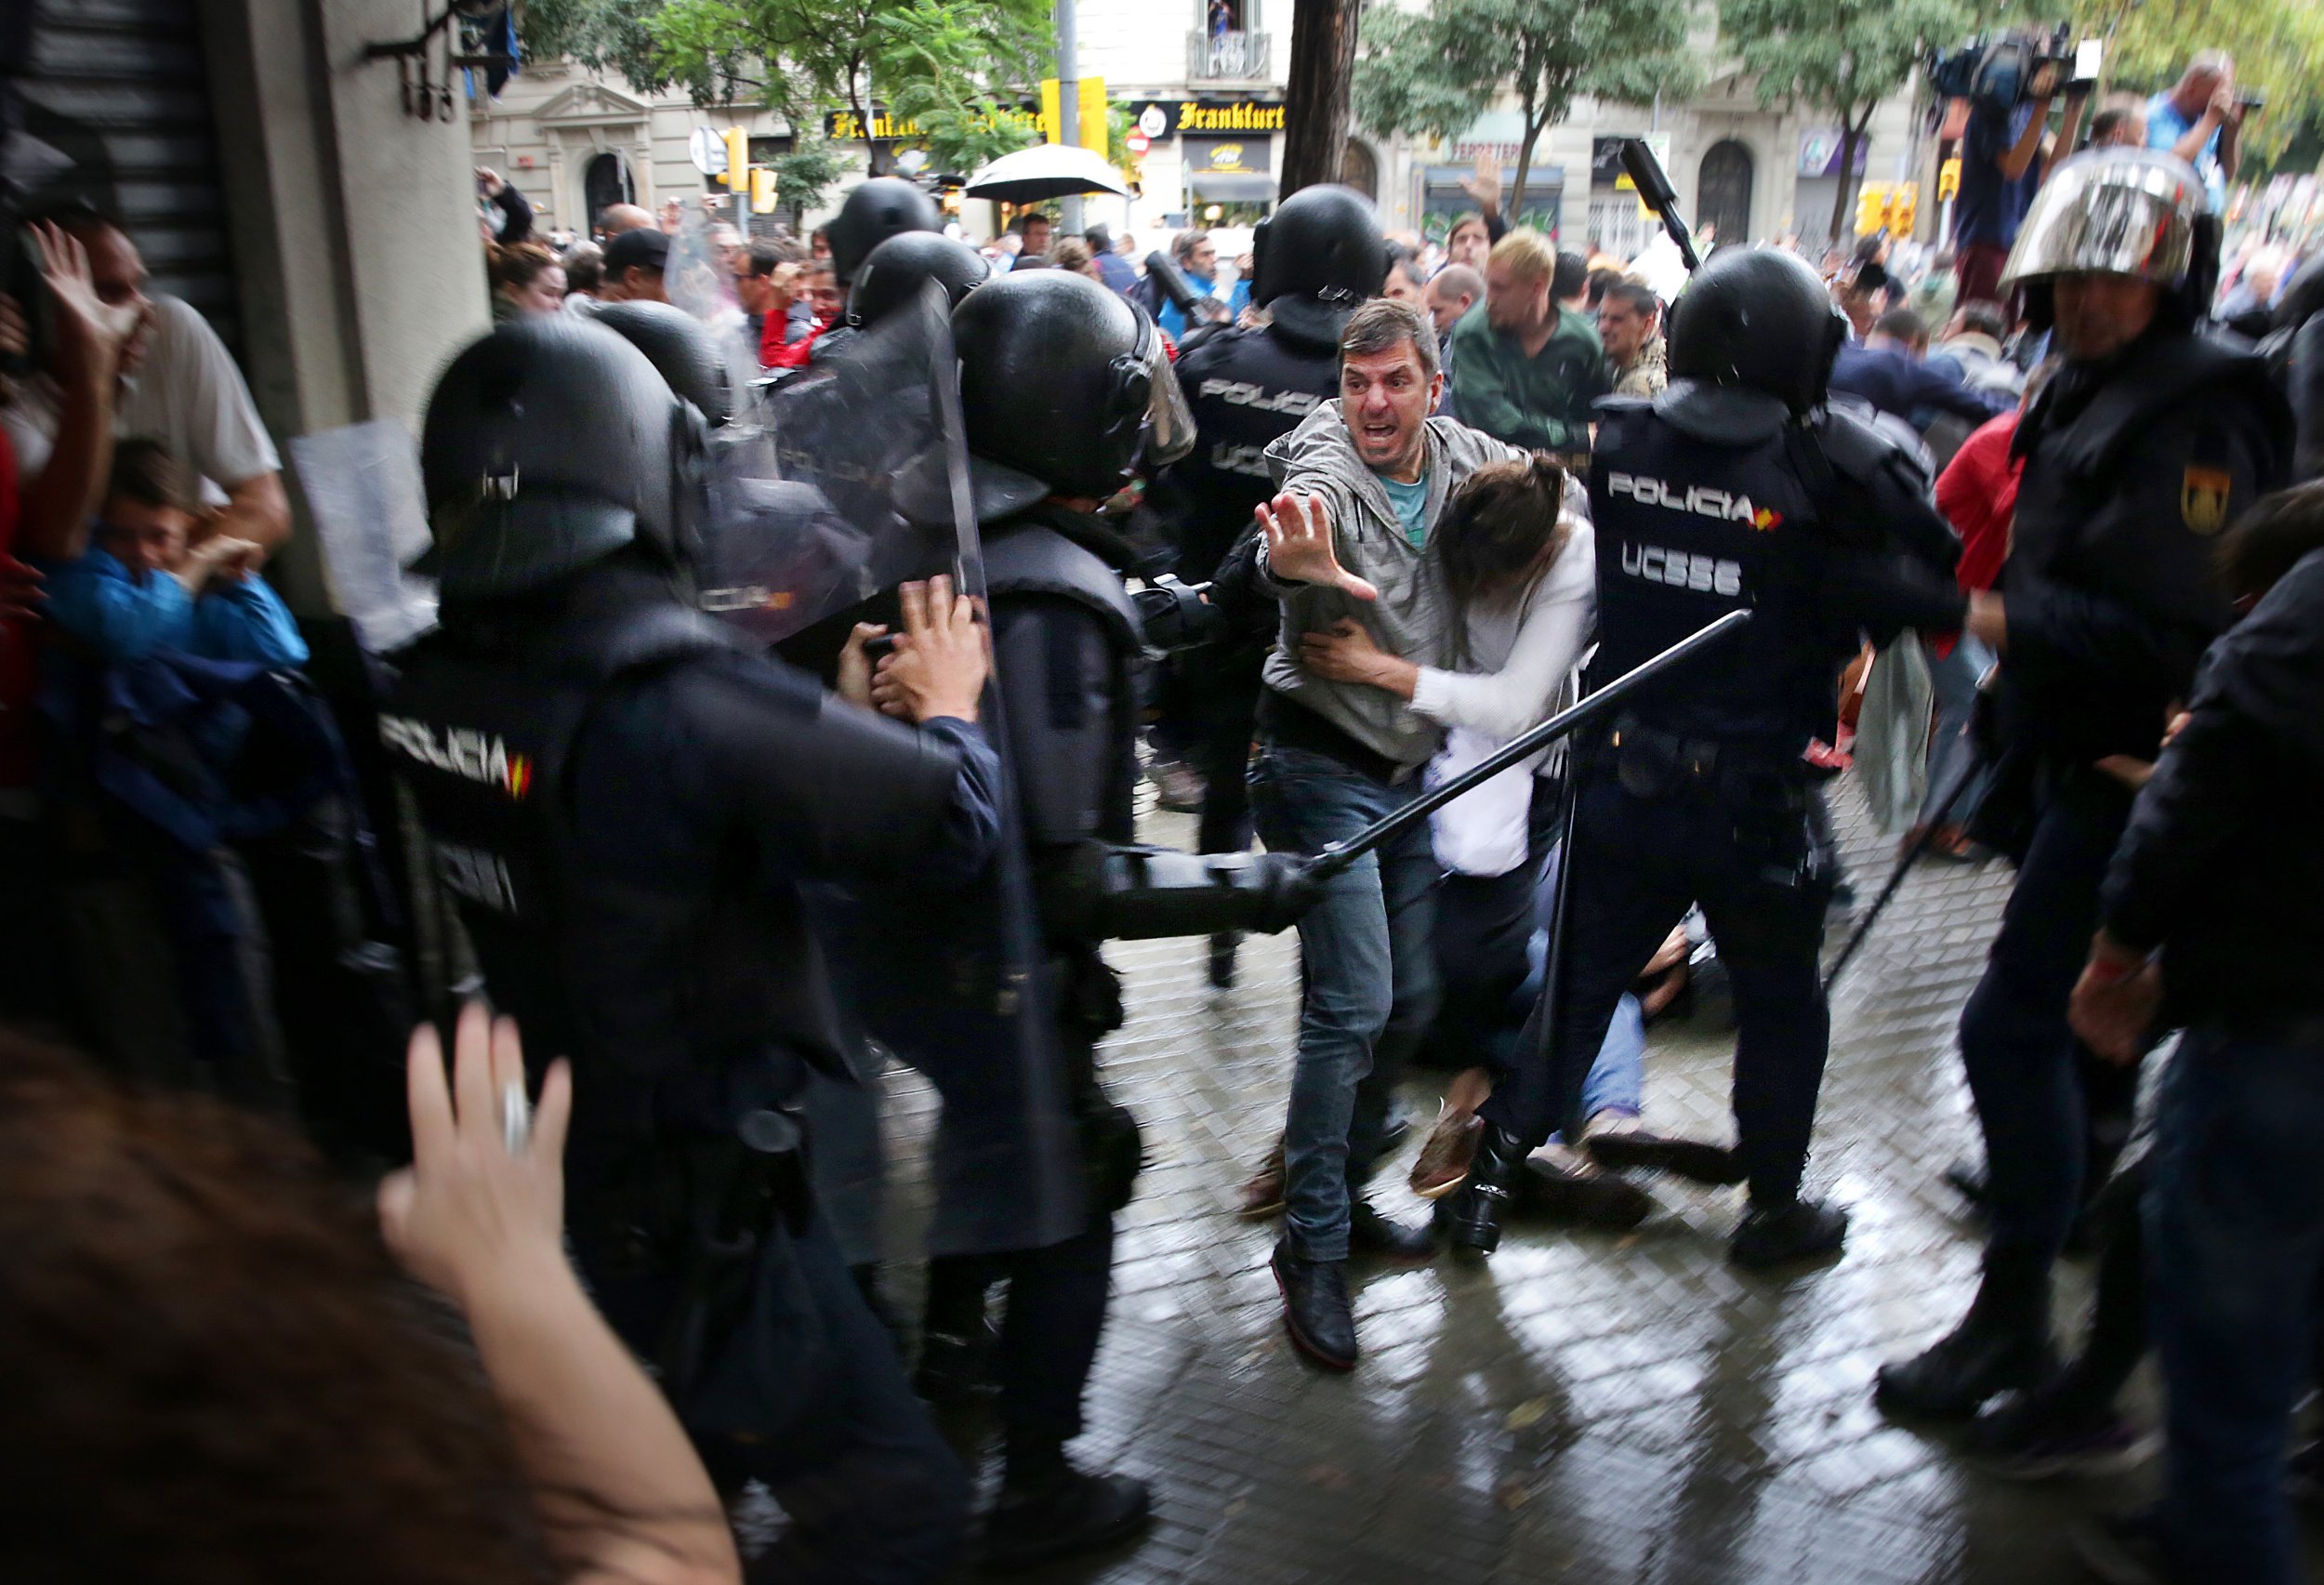 Evidence submitted to try 90 police officers over referendum day actions in Barcelona